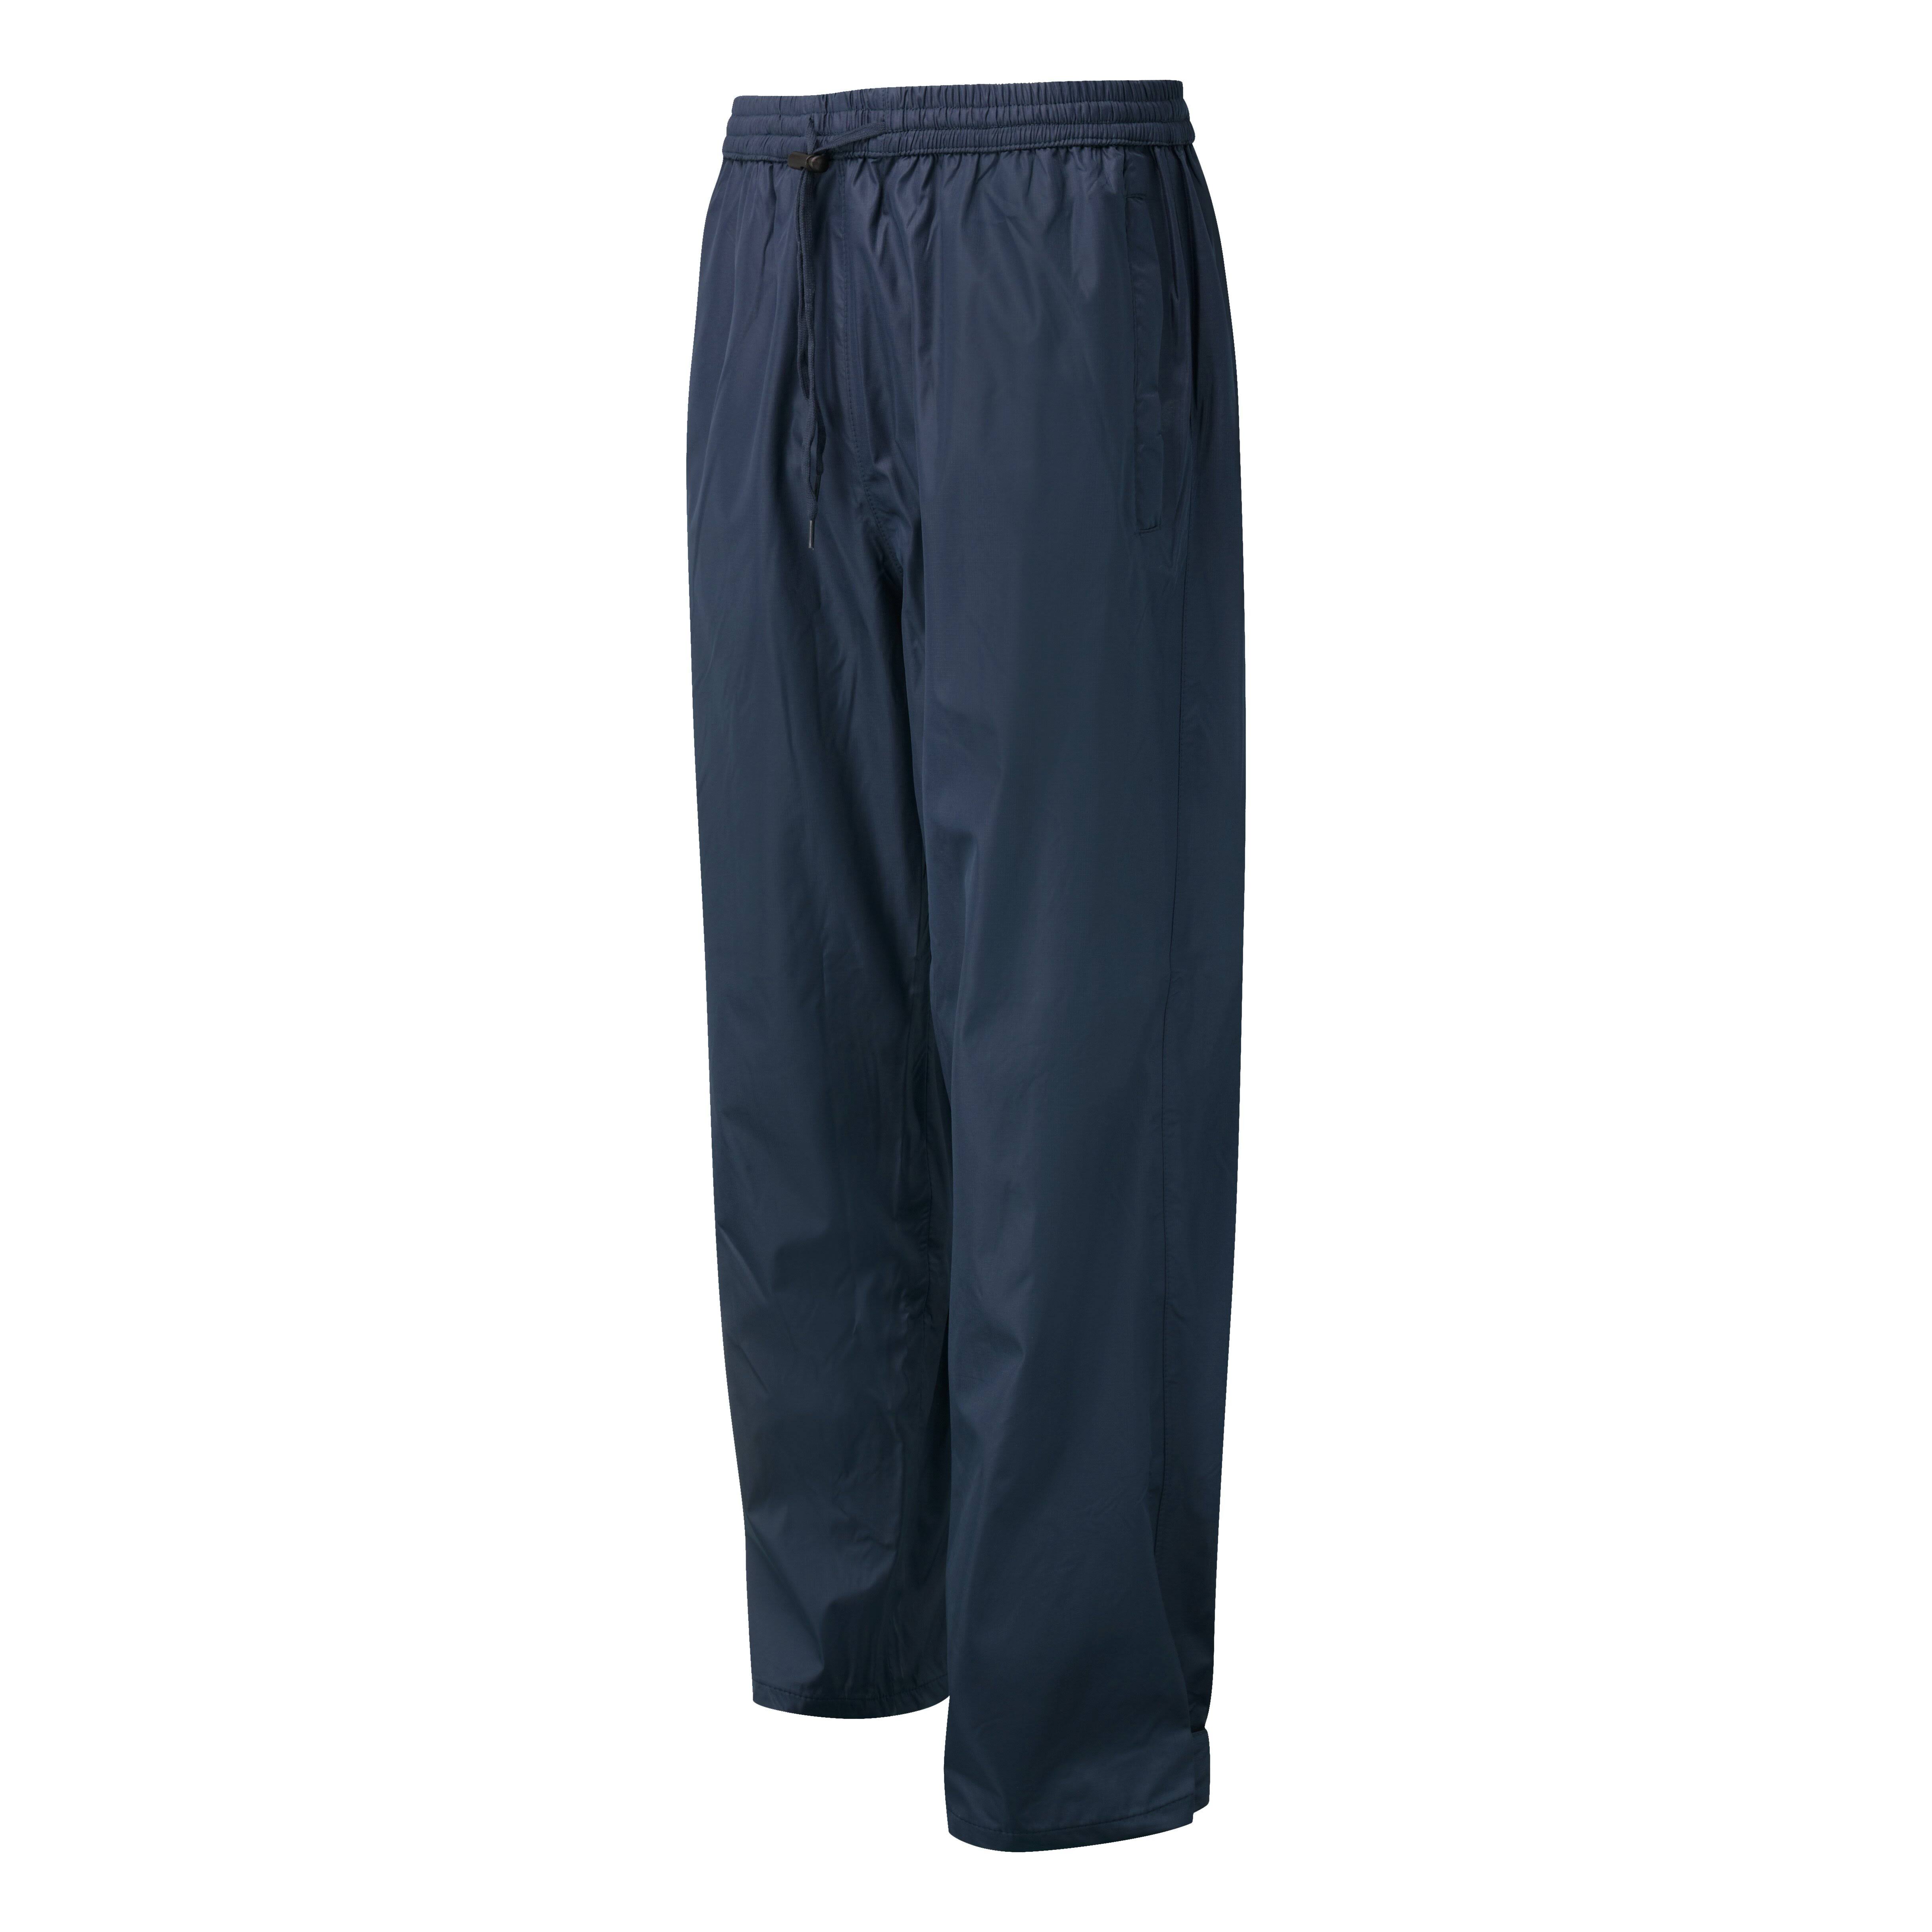 Fort Tempest Waterproof Work Trousers Navy - XL